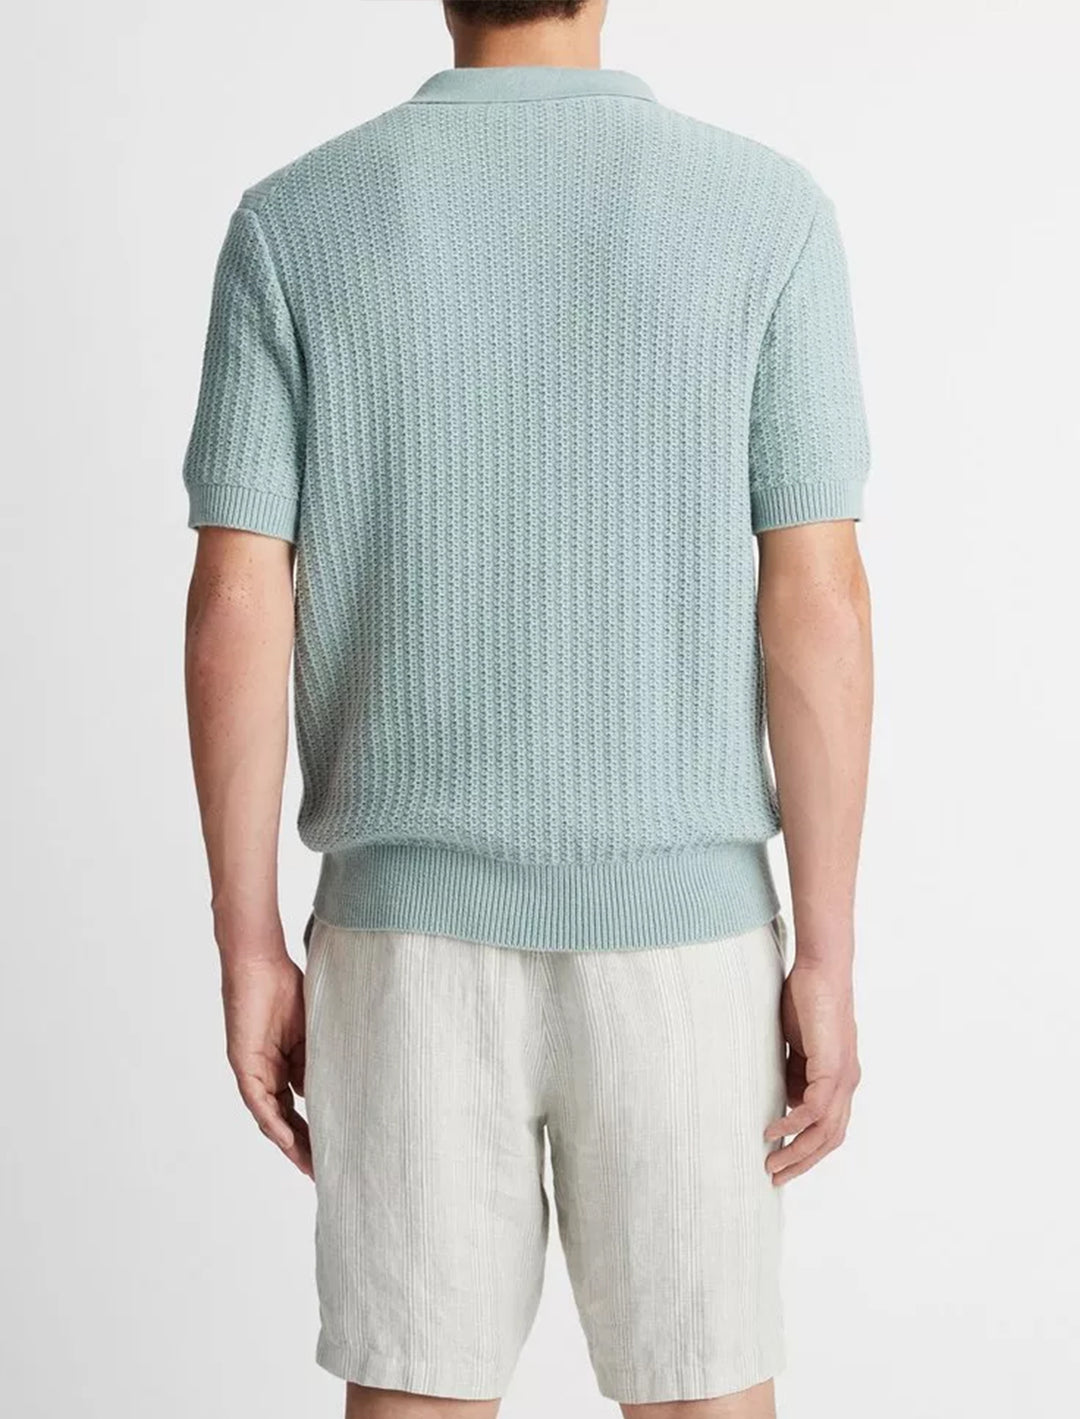 mens crafted rib s/s johnny collar sweater in ceramic blue (3)